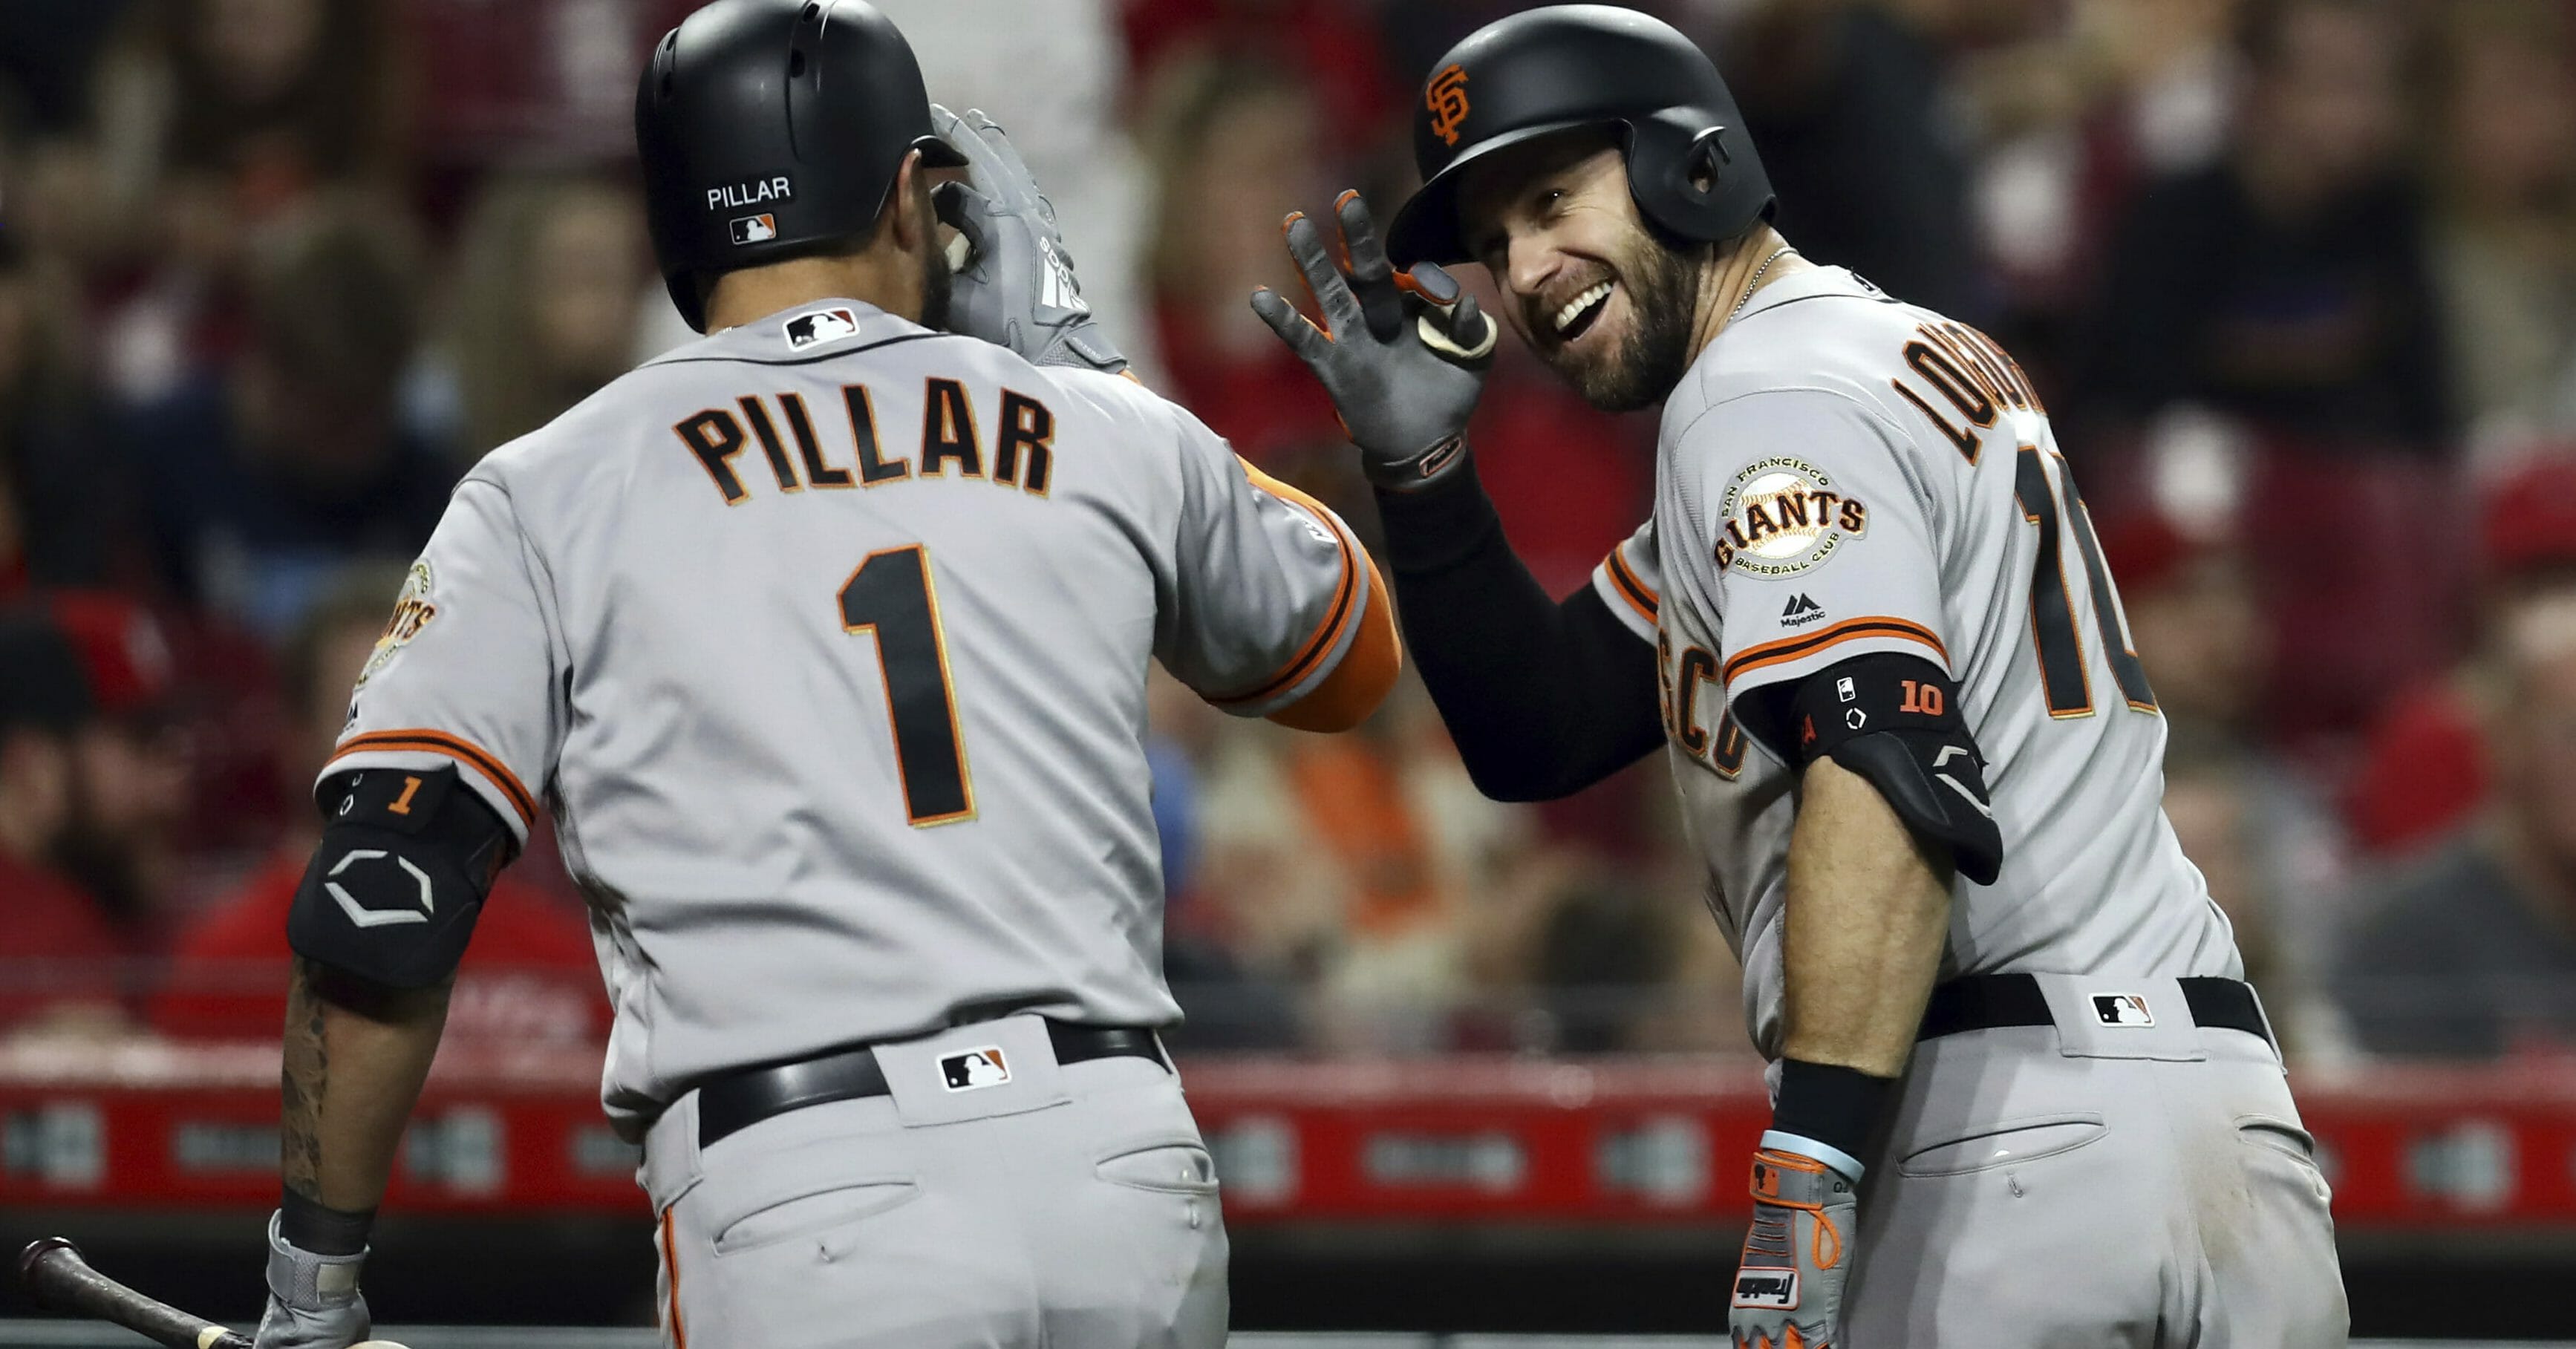 San Francisco Giants' Evan Longoria celebrates with Kevin Pillar after hitting a home run for the go-ahead run in the 11th inning against the Cincinnati Reds on Friday, May 3, 2019, in Cincinnati.